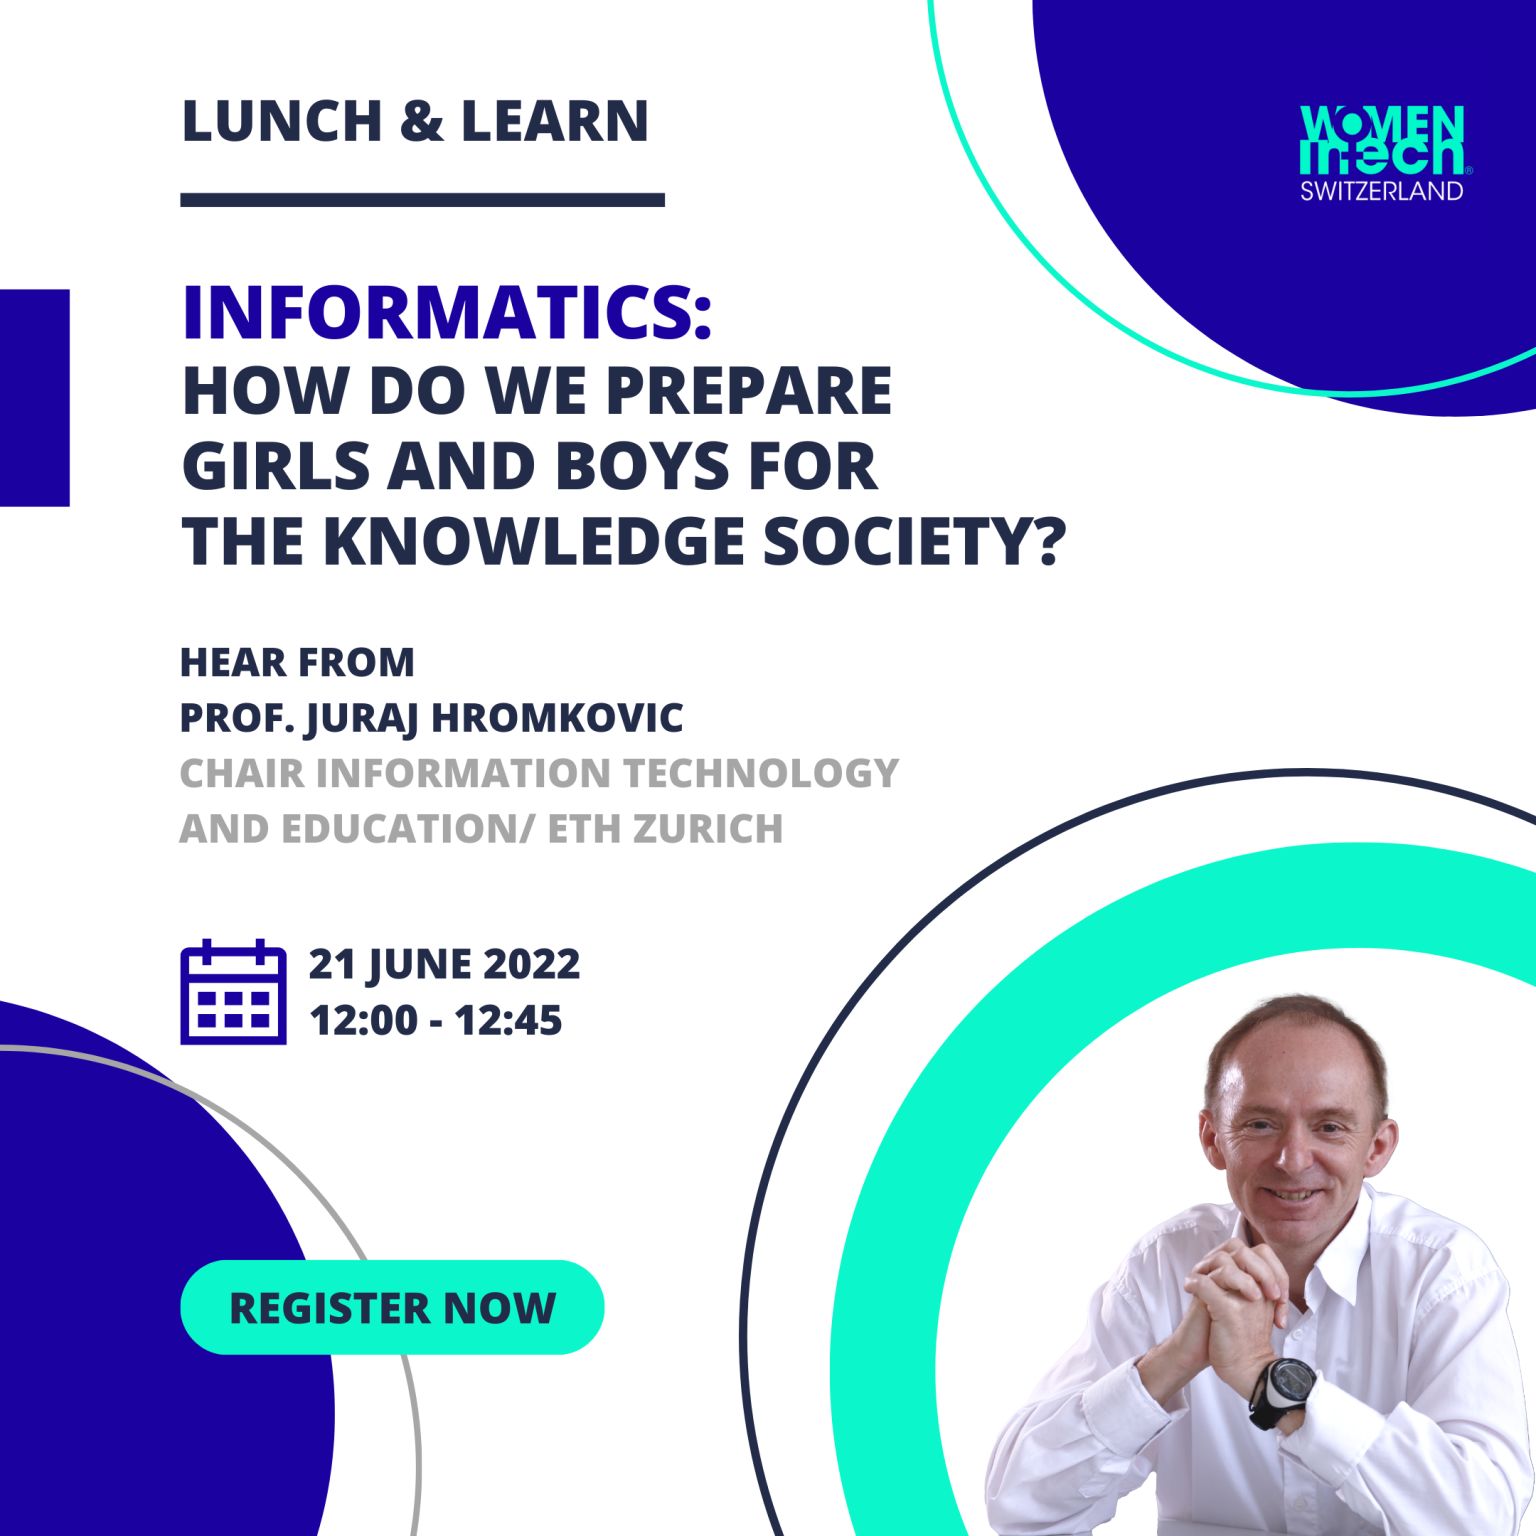 Lunch & Learn 2nd Edition